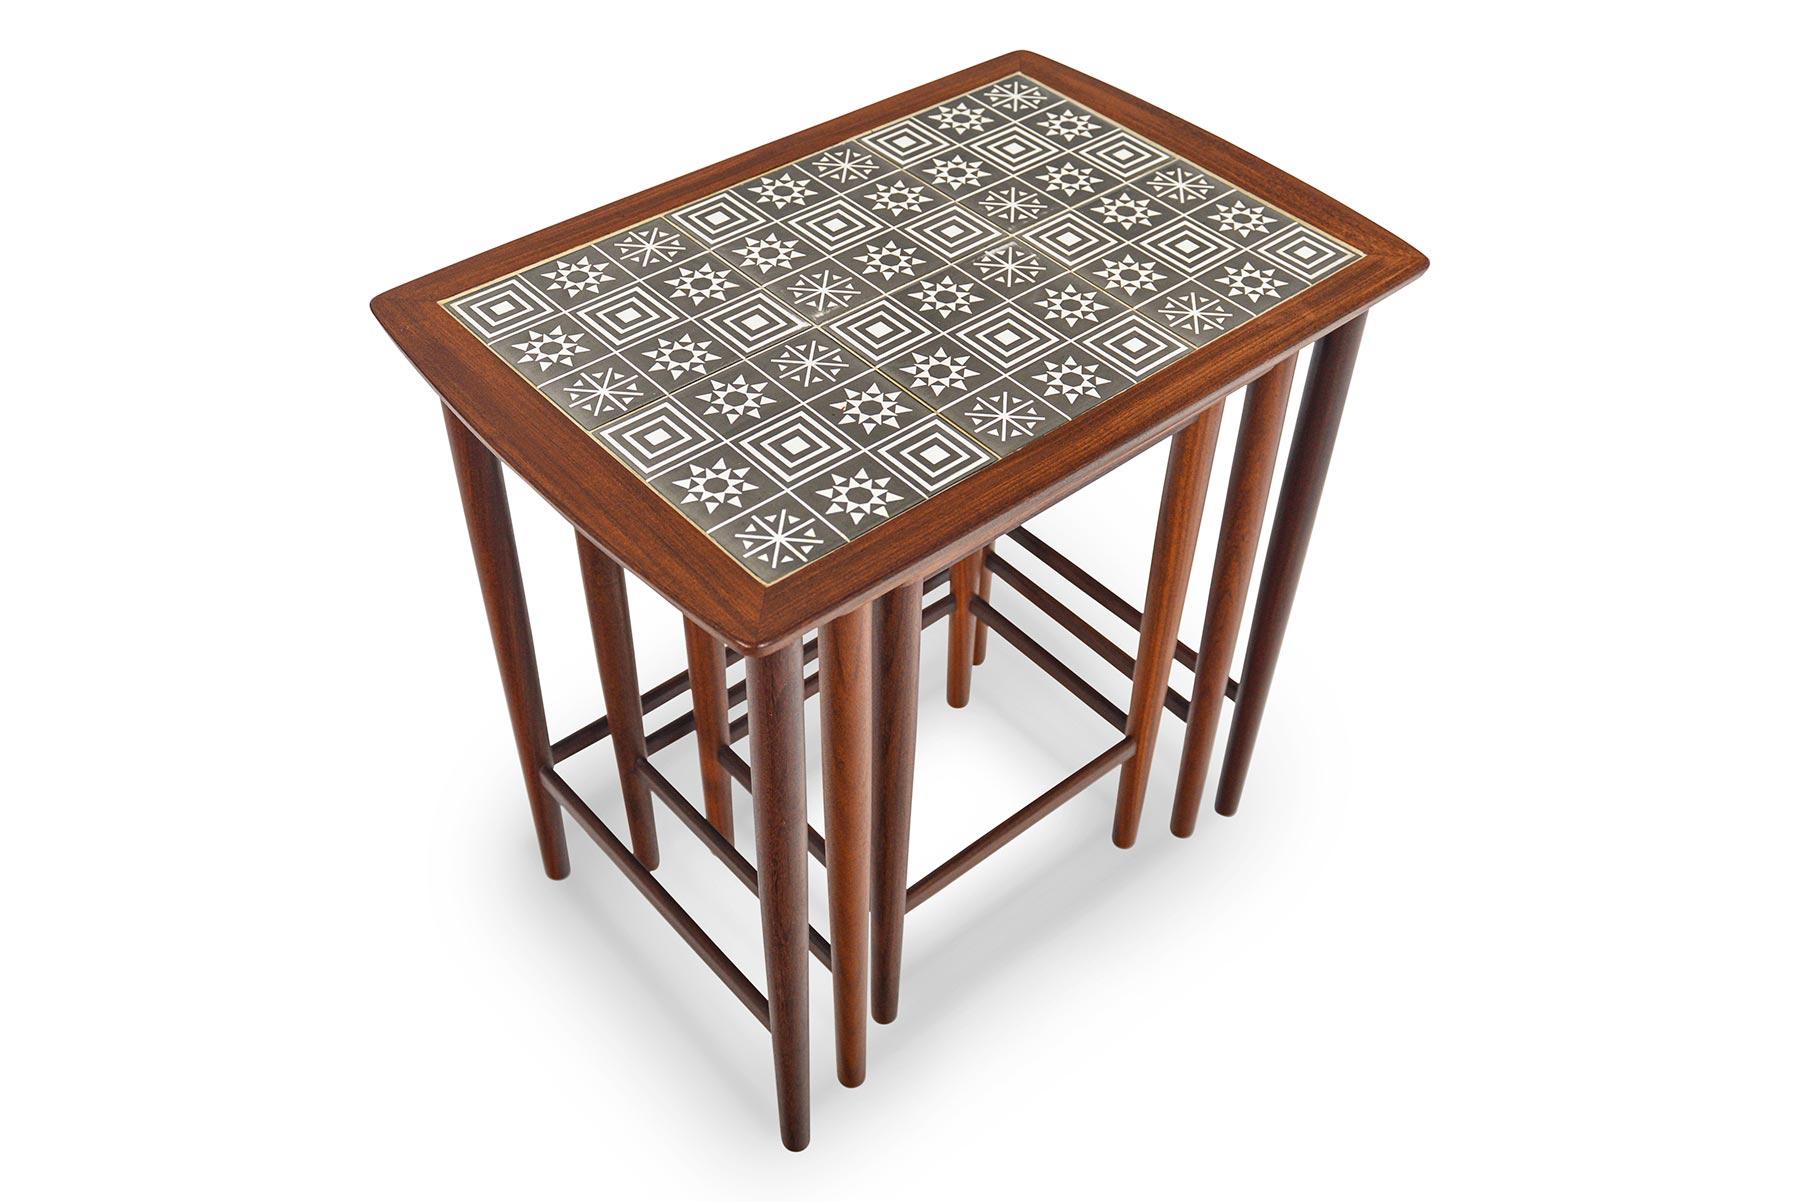 This whimsical set of Danish modern nesting tables in teak will be the perfect addition to any modern home. Each table is adorned with Scandinavian designed “snowflake” tiles. Perfect for stress- free serving and entertaining! In excellent original